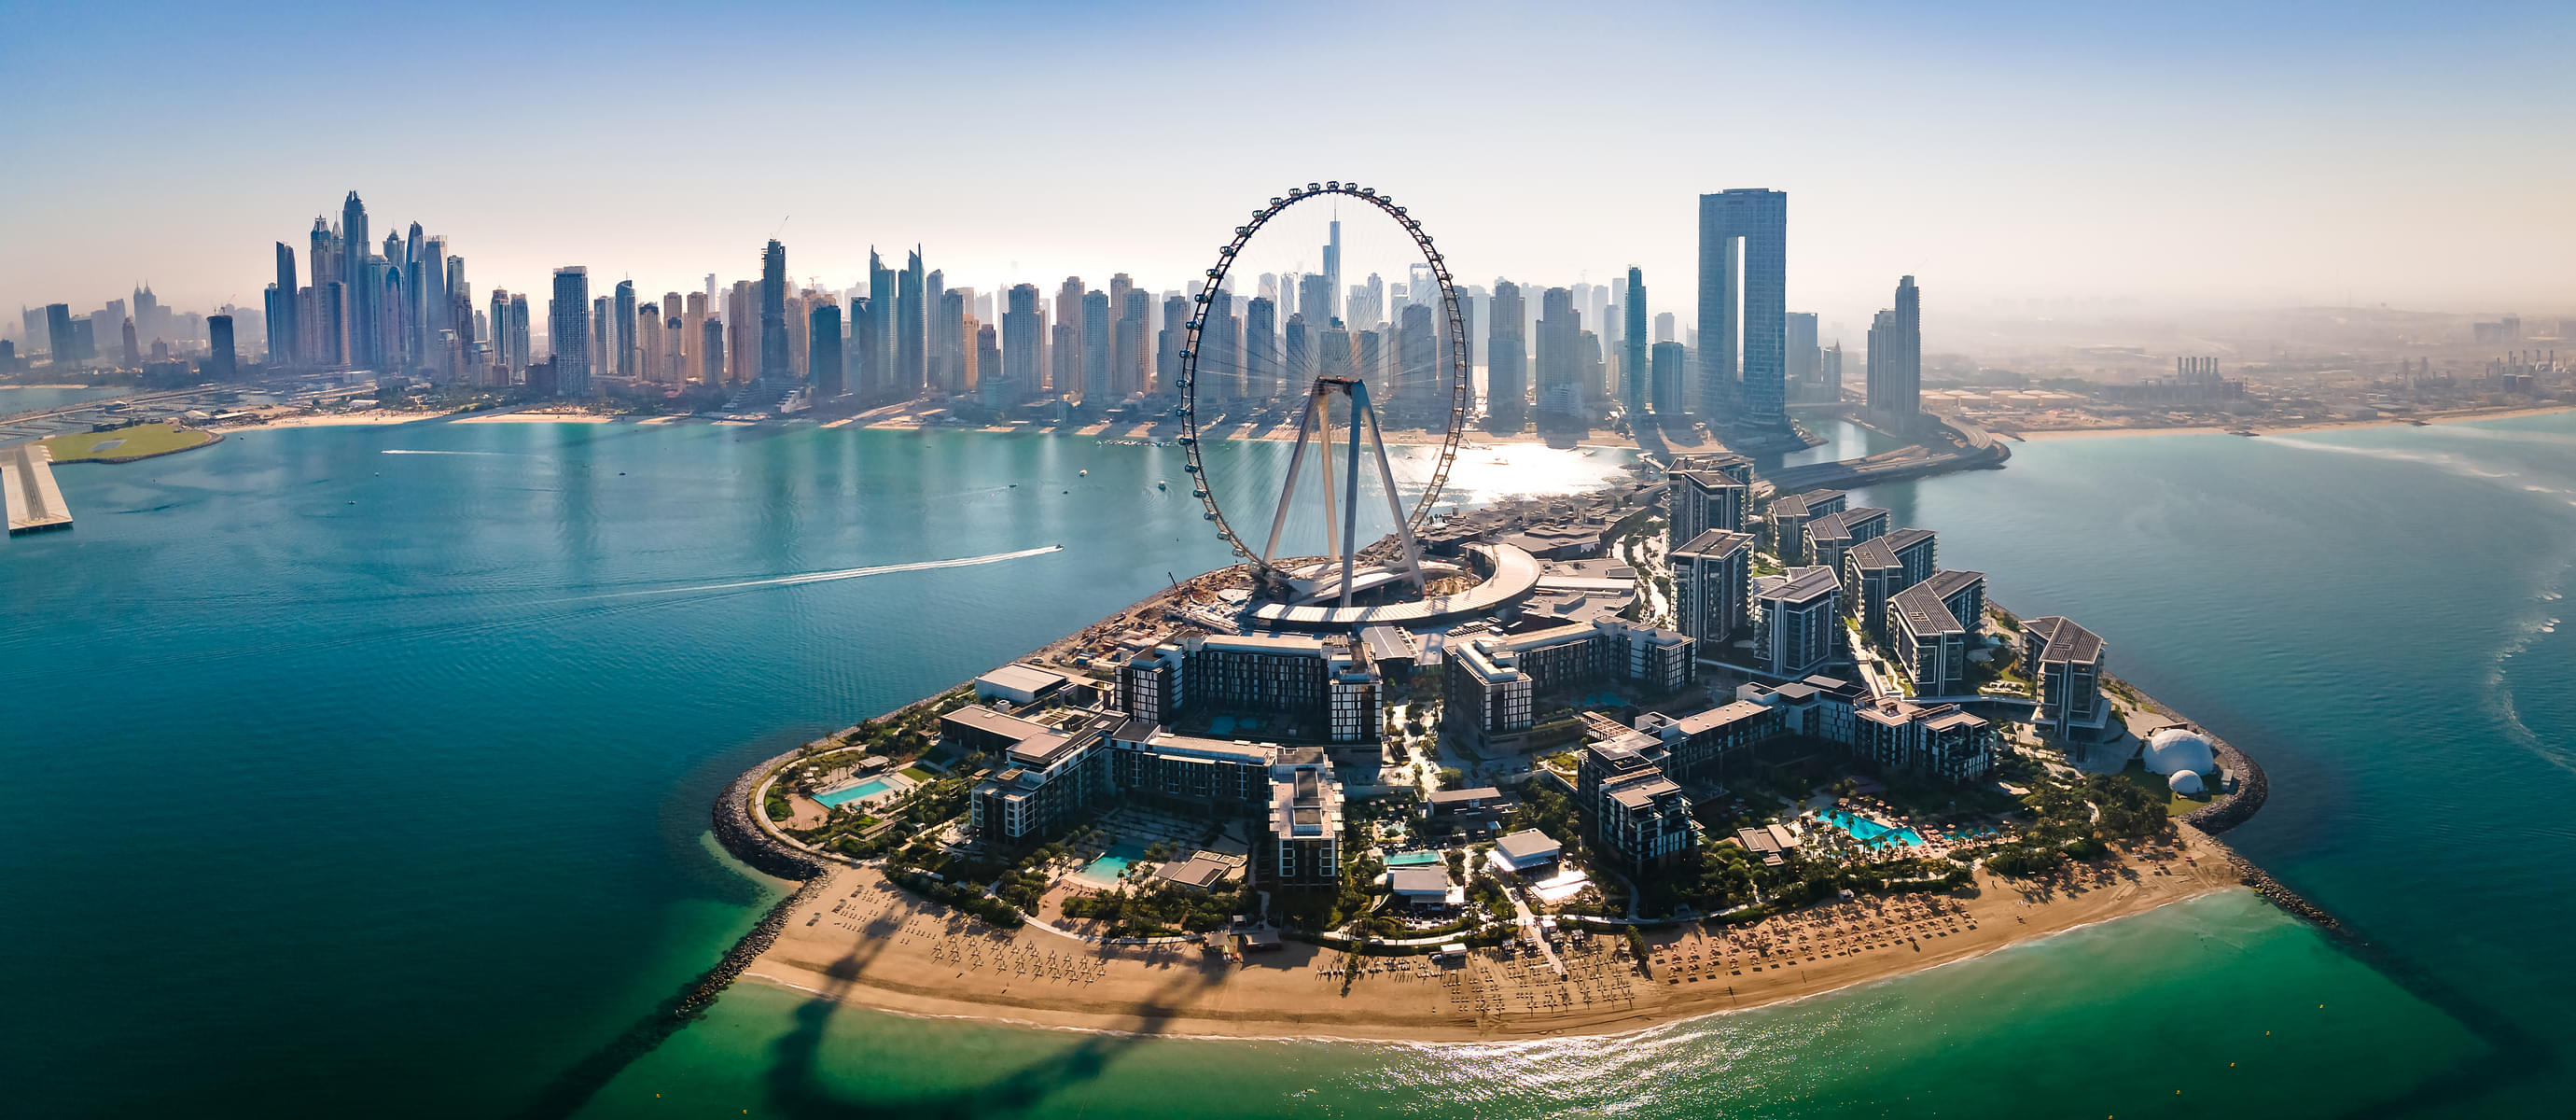 What to Expect on Helicopter Tour Dubai